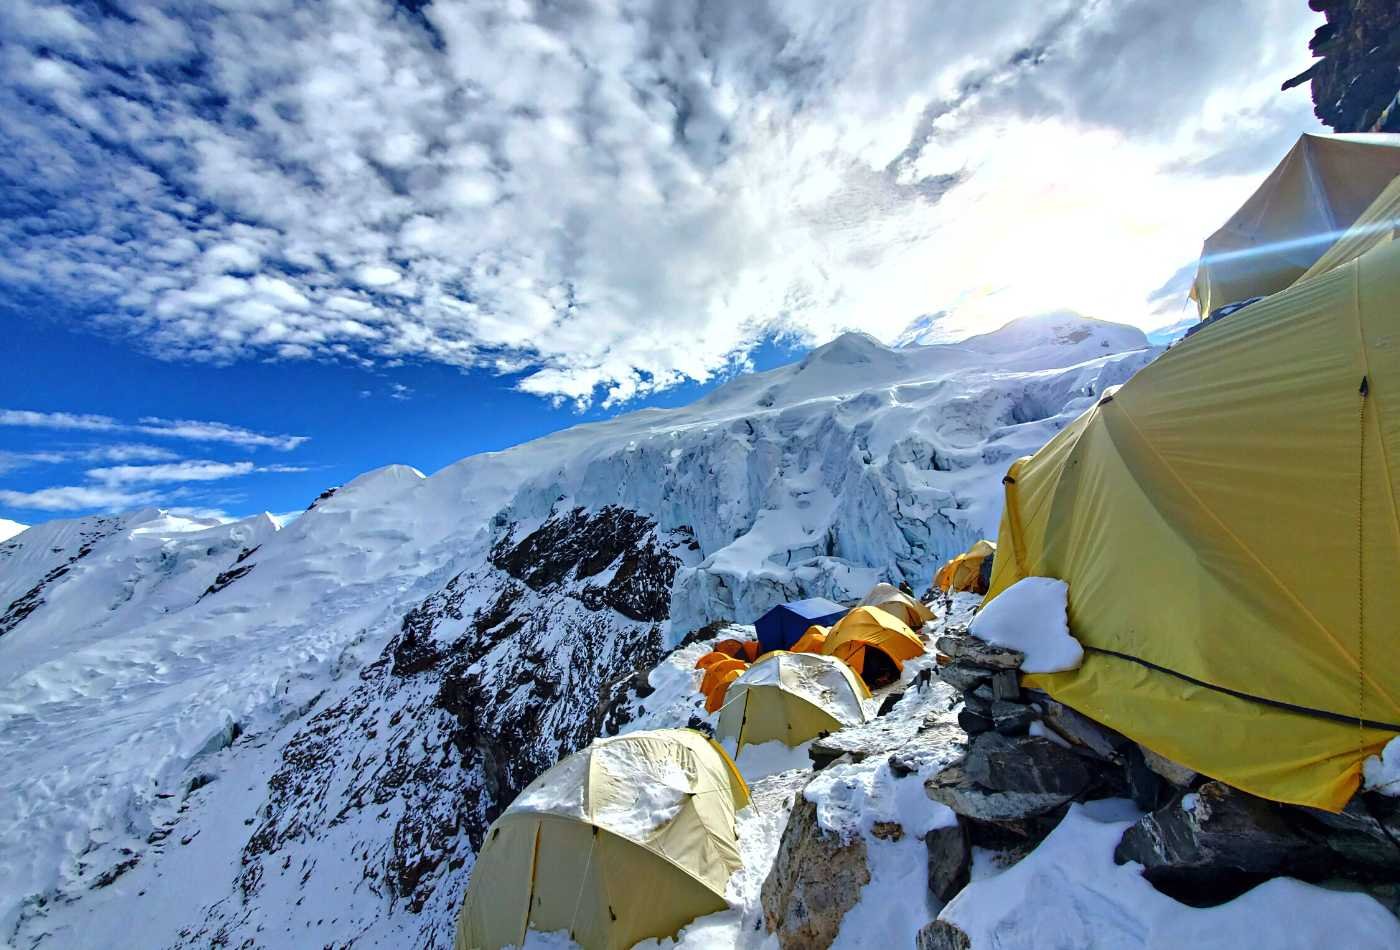 A stunning view of the Mera Peak high camp, with a tent on the snowy ground, surrounded by scattered clouds. 